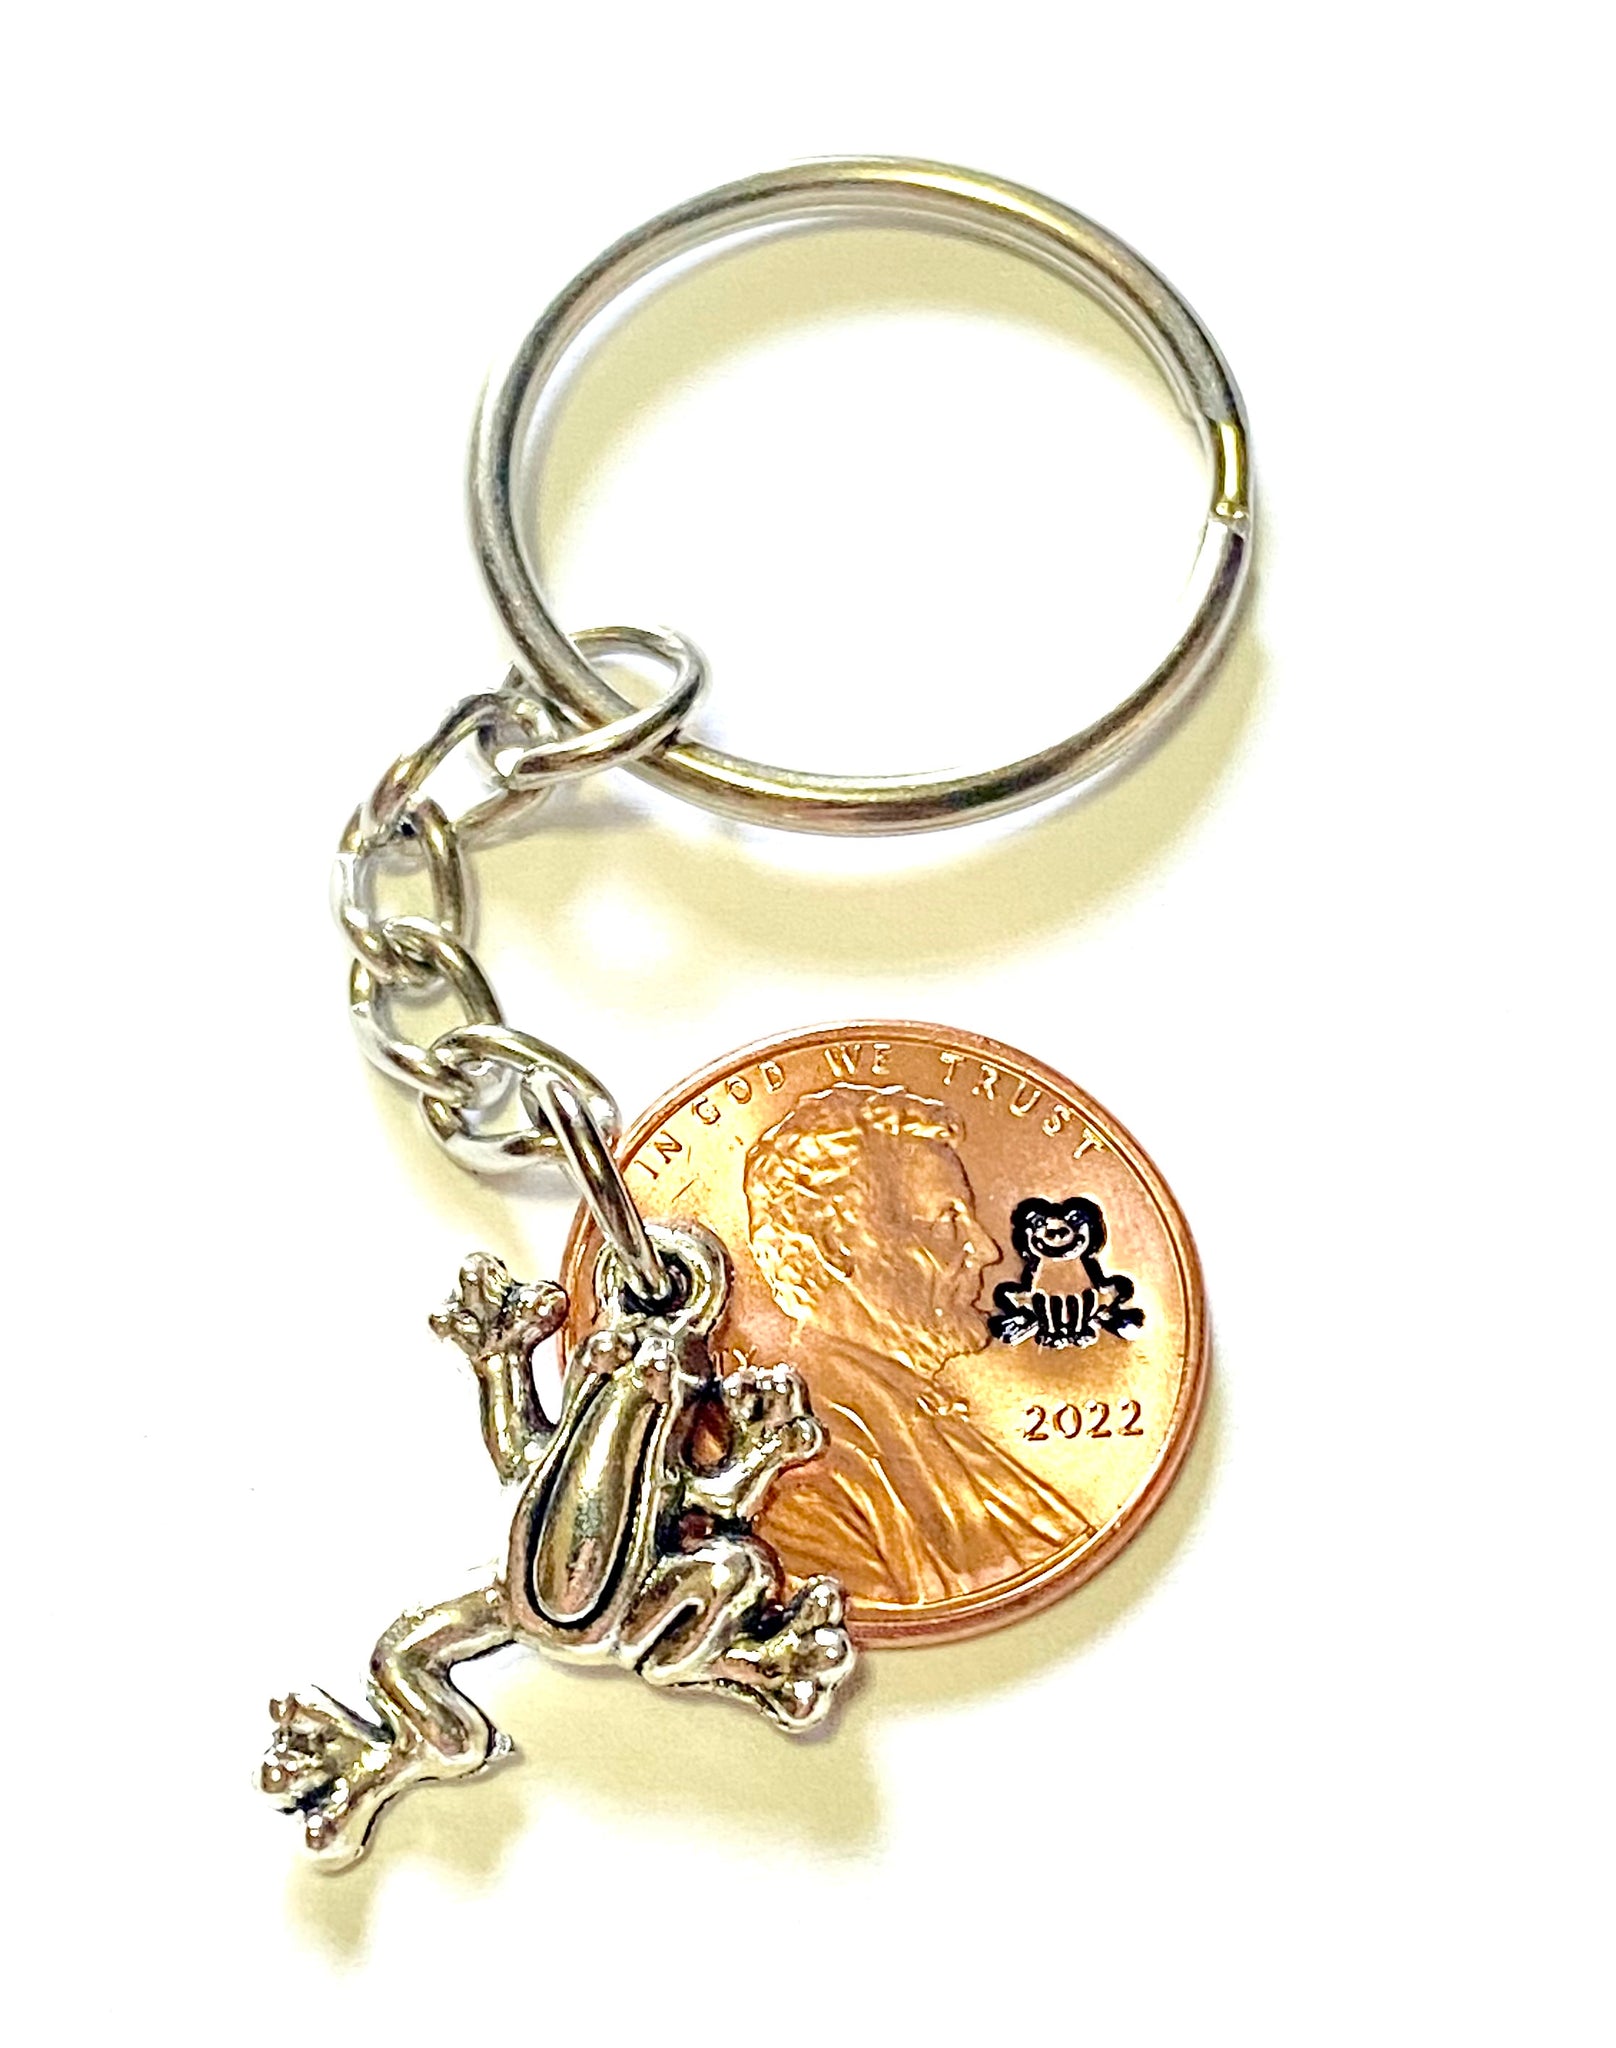 Frog Lucky Penny Keychain with a silver frog charm attached to a Lincoln Cent showing an engraving of a happy frog.